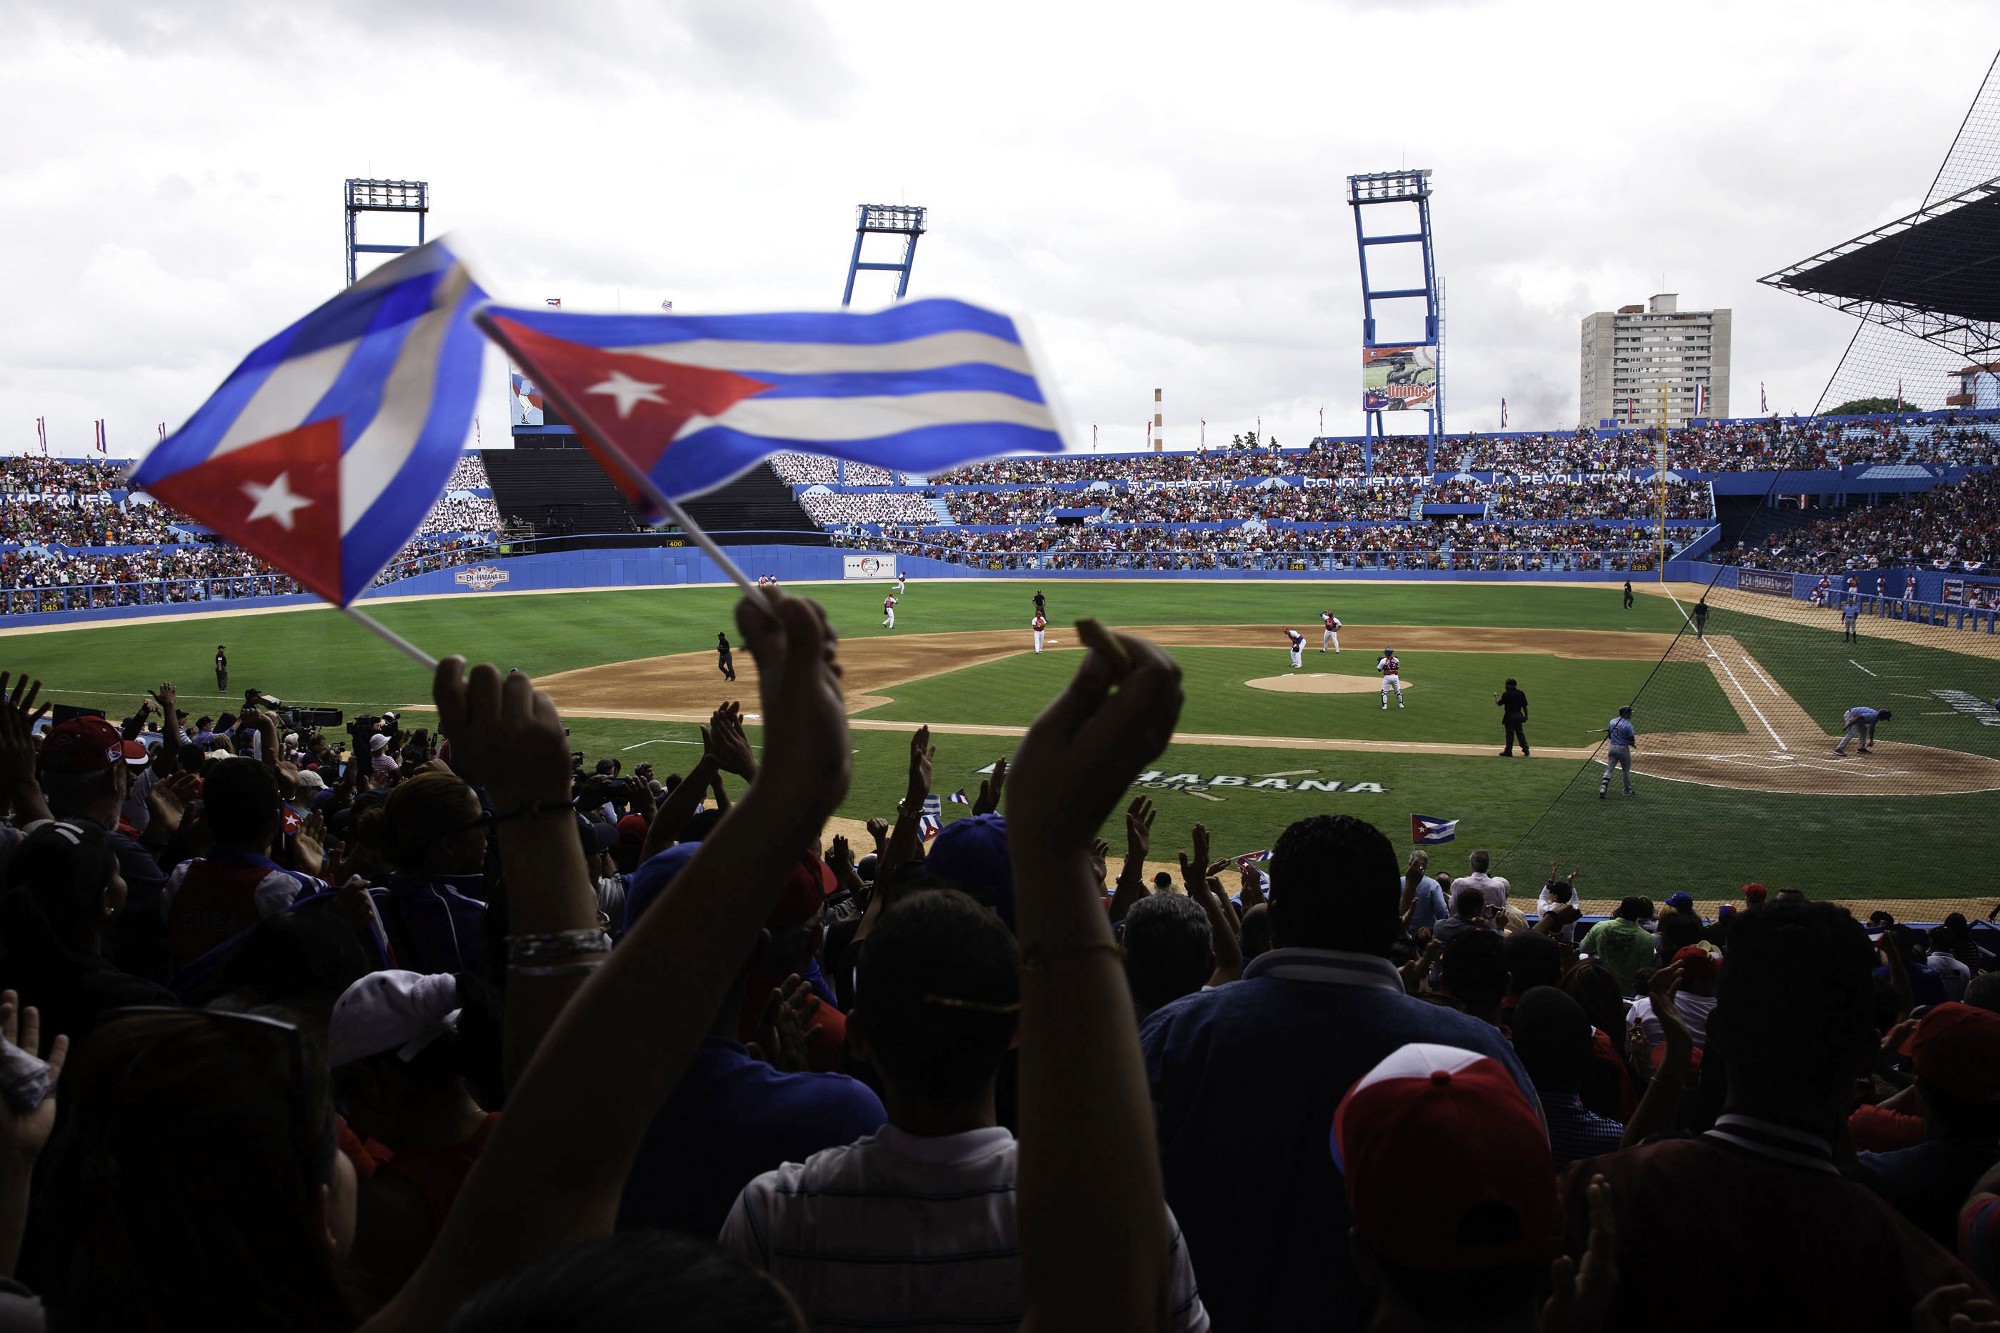 Fans react during an exhibition baseball game between the Tampa Bay Rays and the Cuban National Team at the Estadio Latinoamericano in Havana, Cuba, March 22, 2016. (Official White House Photo by Chuck Kennedy)